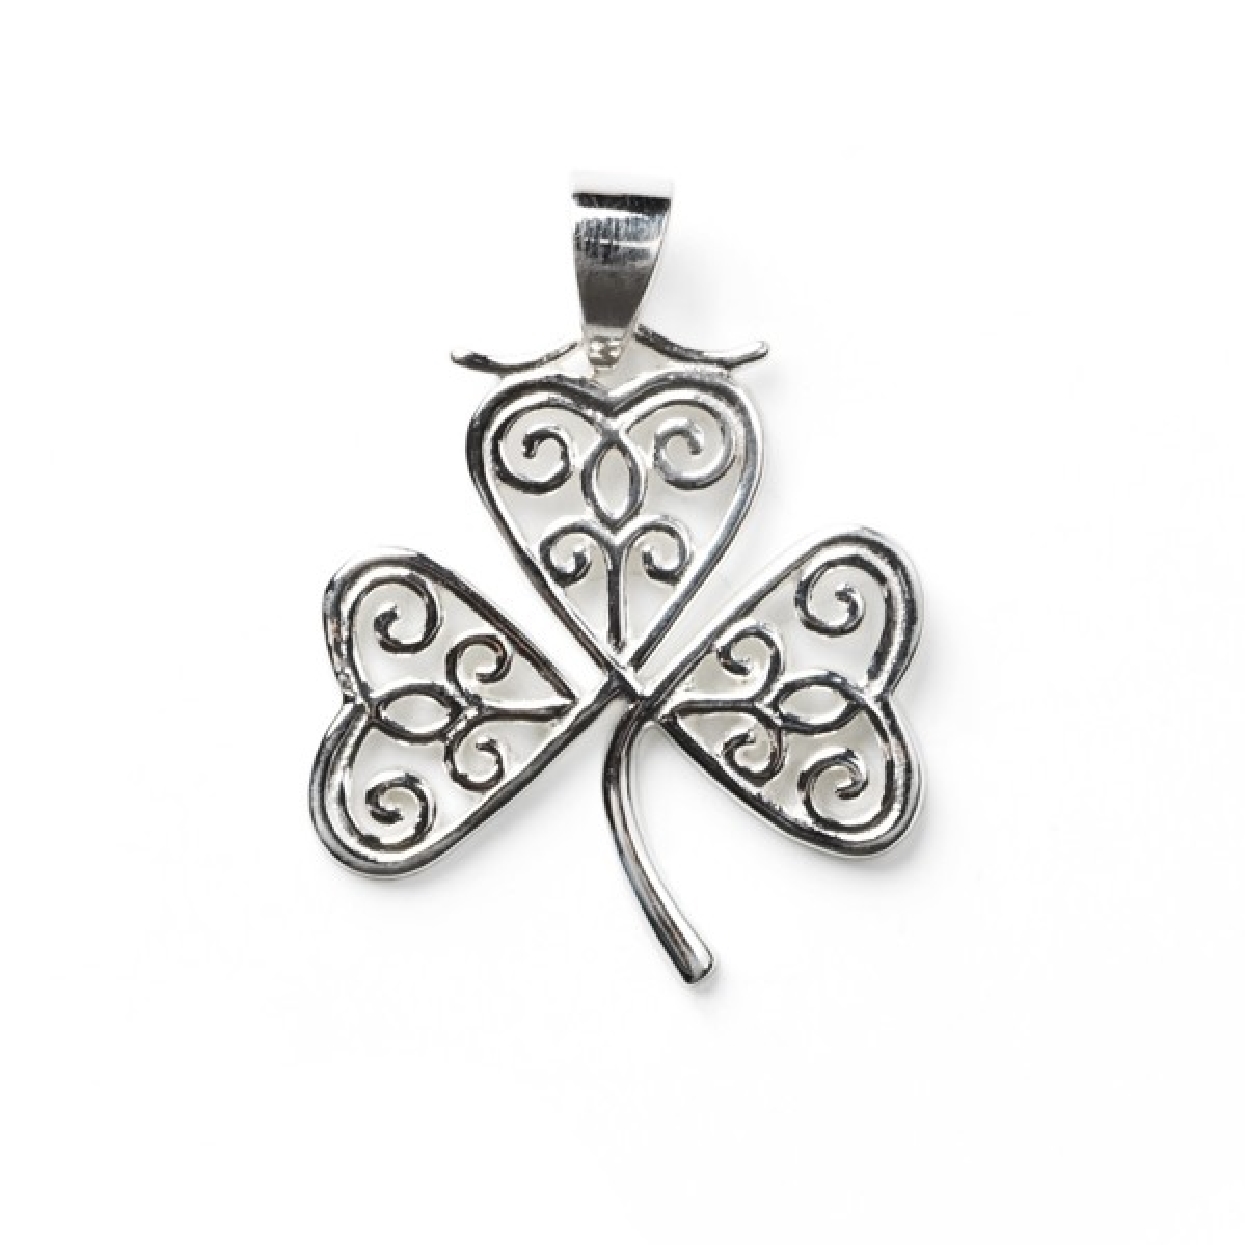 Southern Gates Sterling Silver Holiday Clover Scroll Pendant

P965